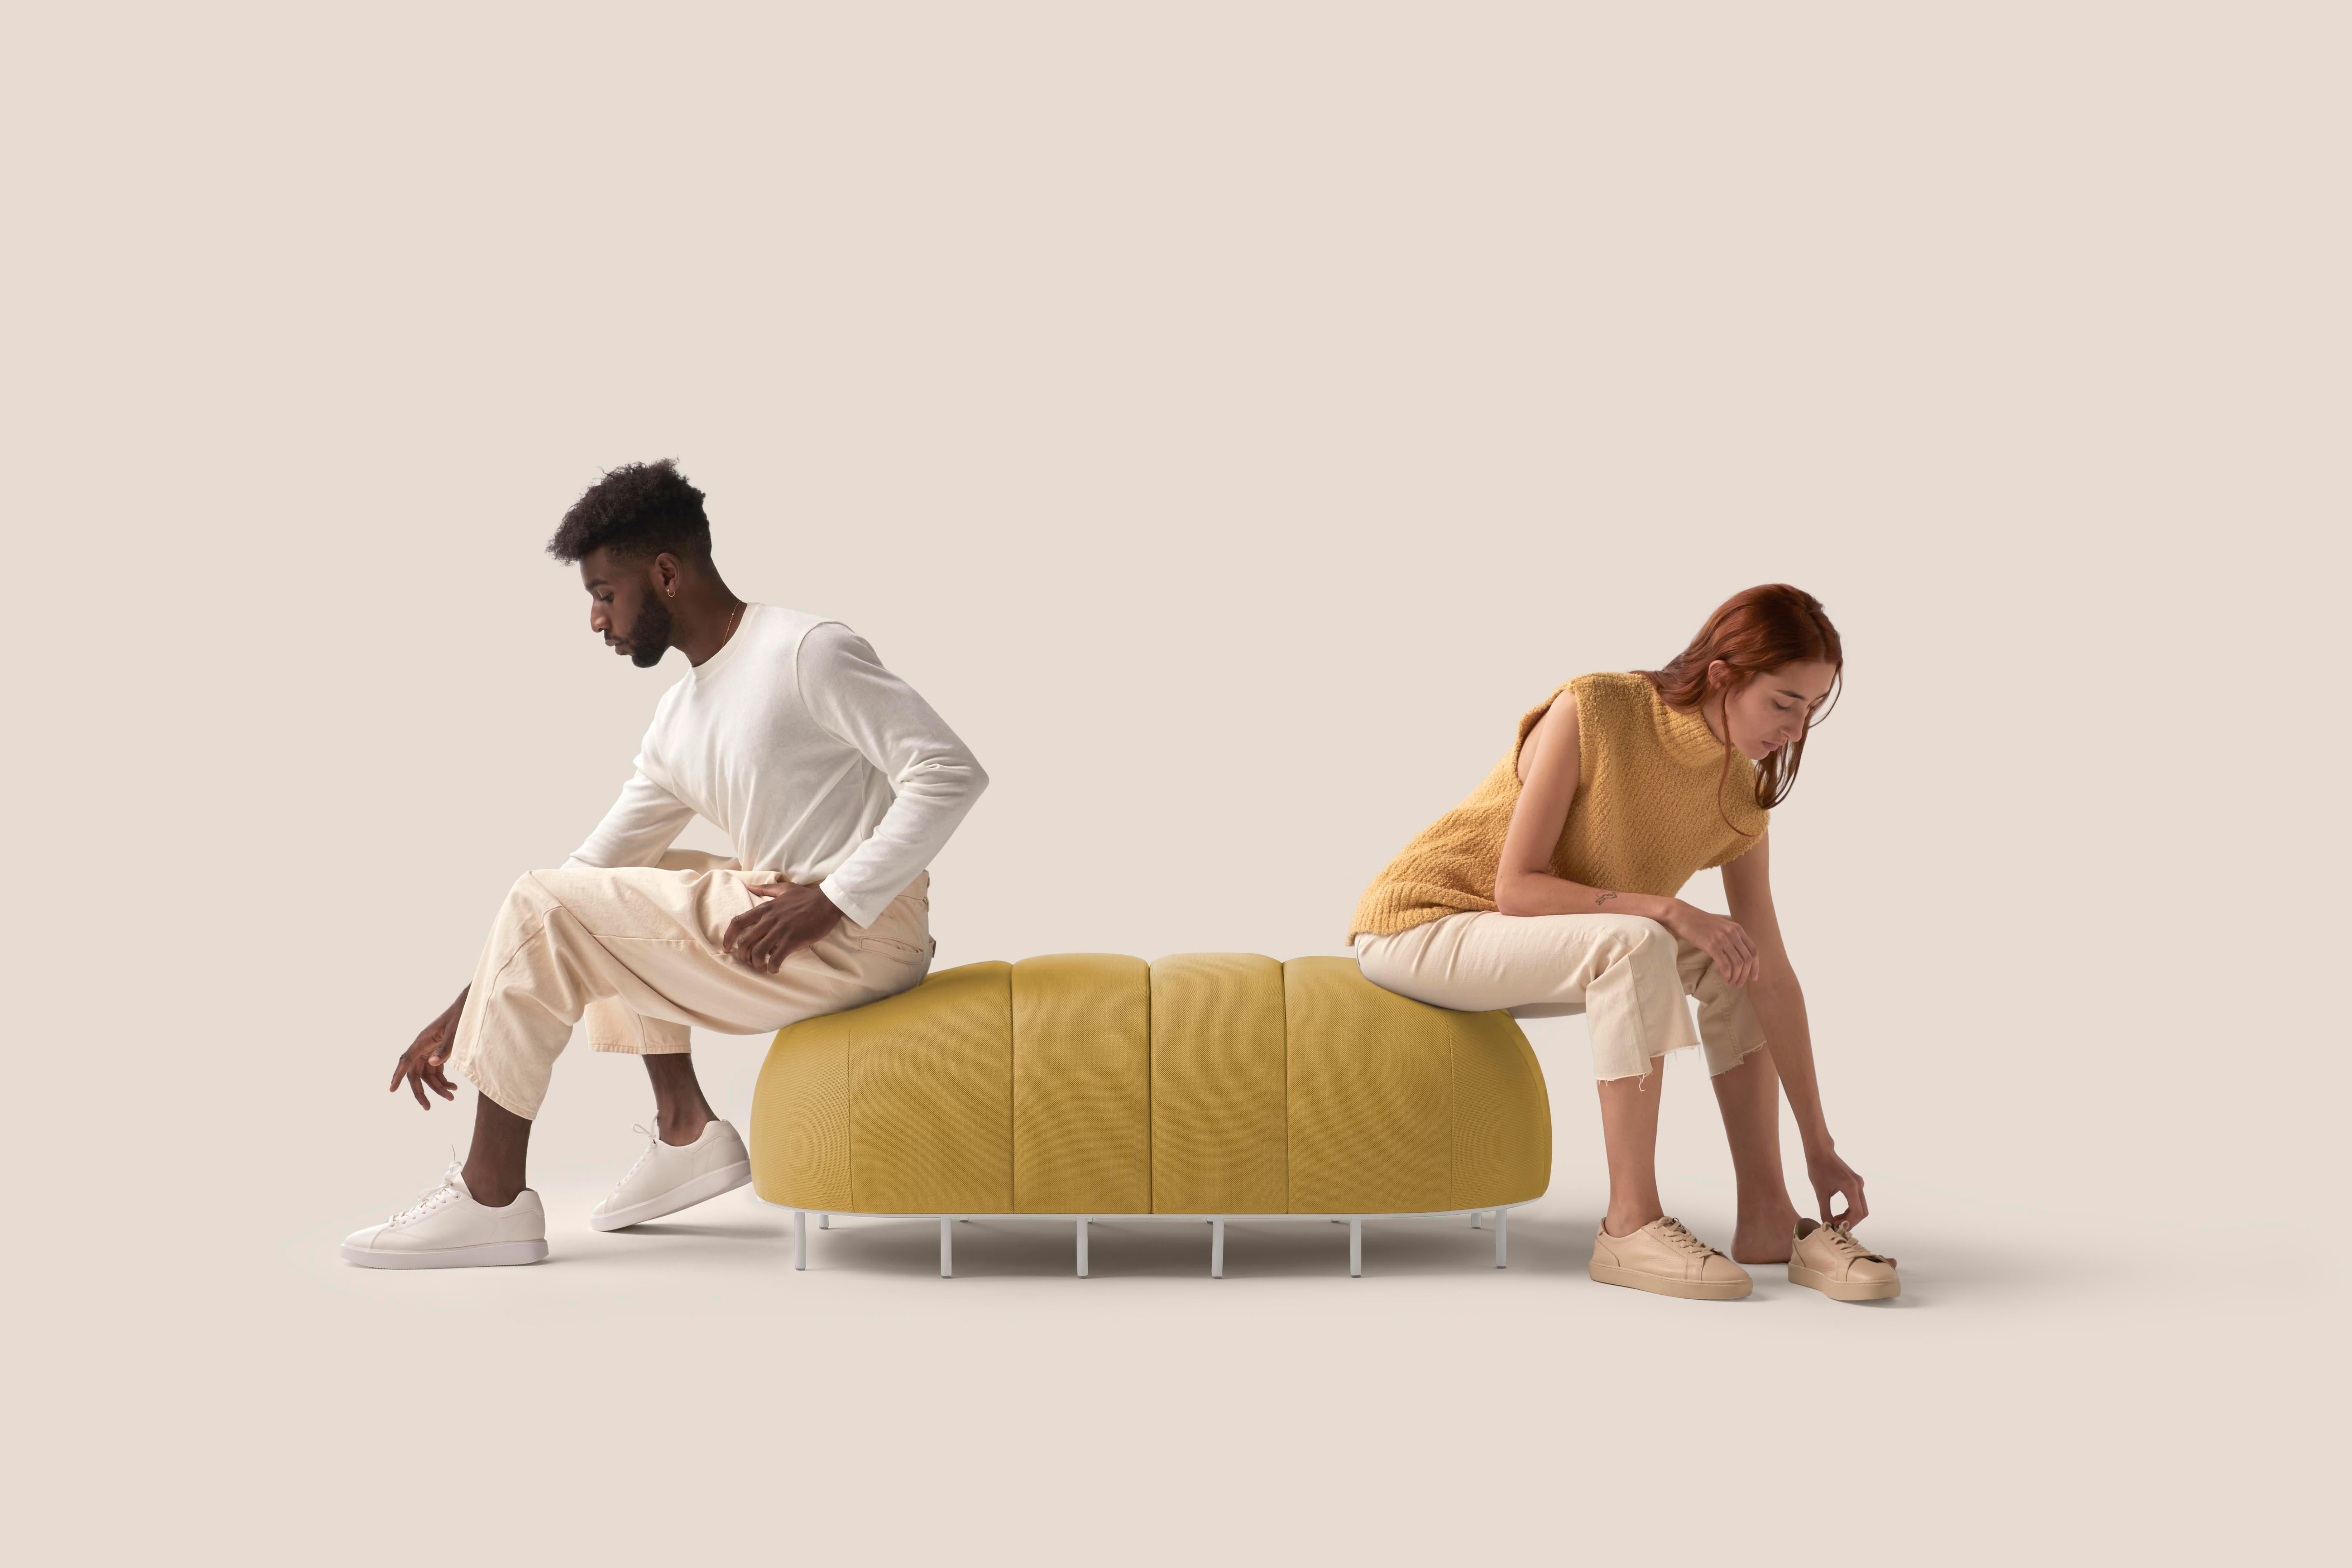 Straight Module Worm Bench by Pepe Albargues
Dimensions: D 65 x W 50 x H 50 cm
Materials: Plywood, foam CMHR, iron
Available in different colors. End and Curved modules available.

Worm is an amusing bench that can evolve and change according to the